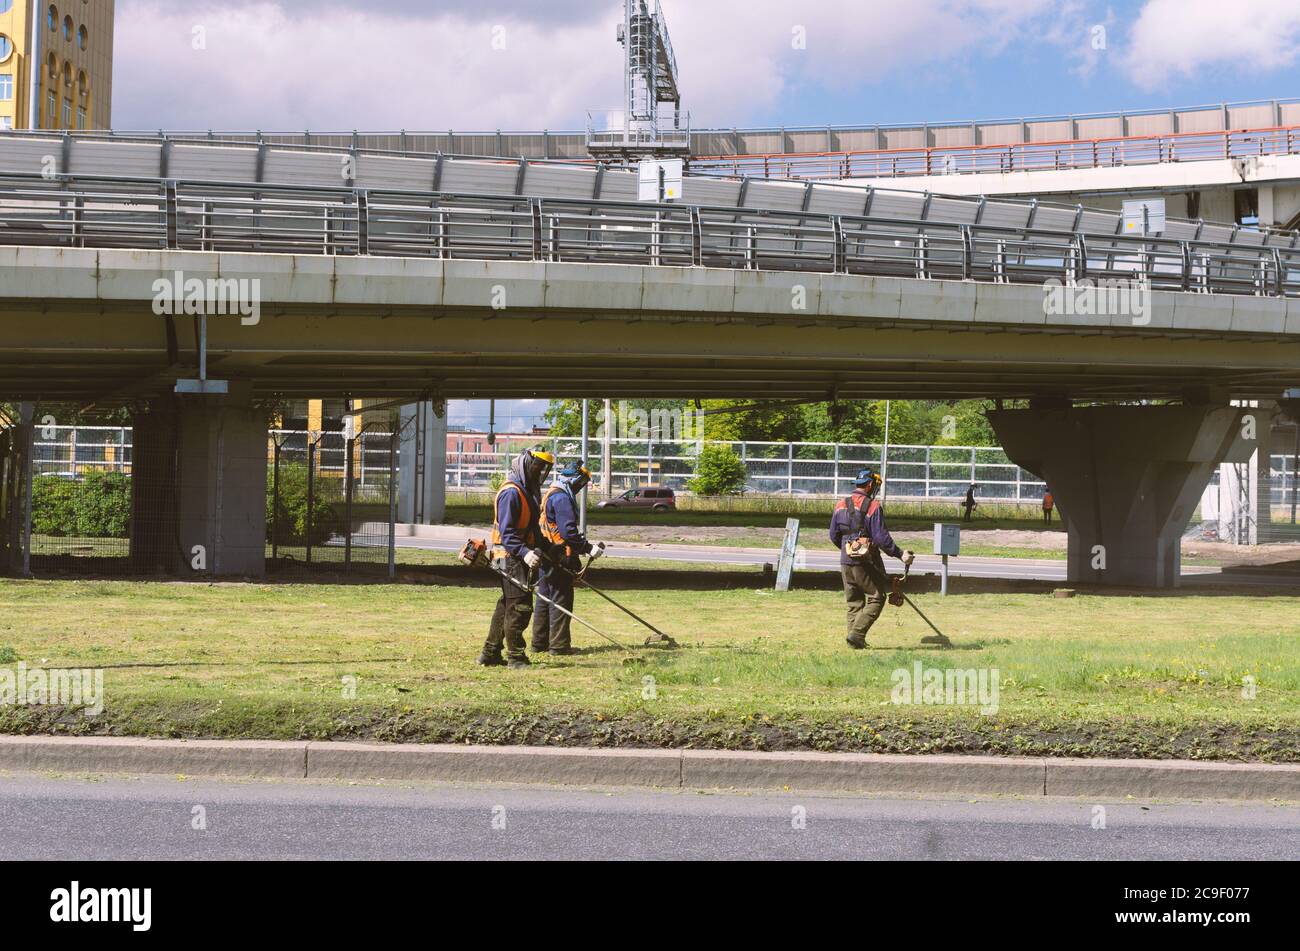 Saint Petersburg, Russia - July 26, 2020: Three workers in overalls mow the grass on the lawn with trimmers Stock Photo